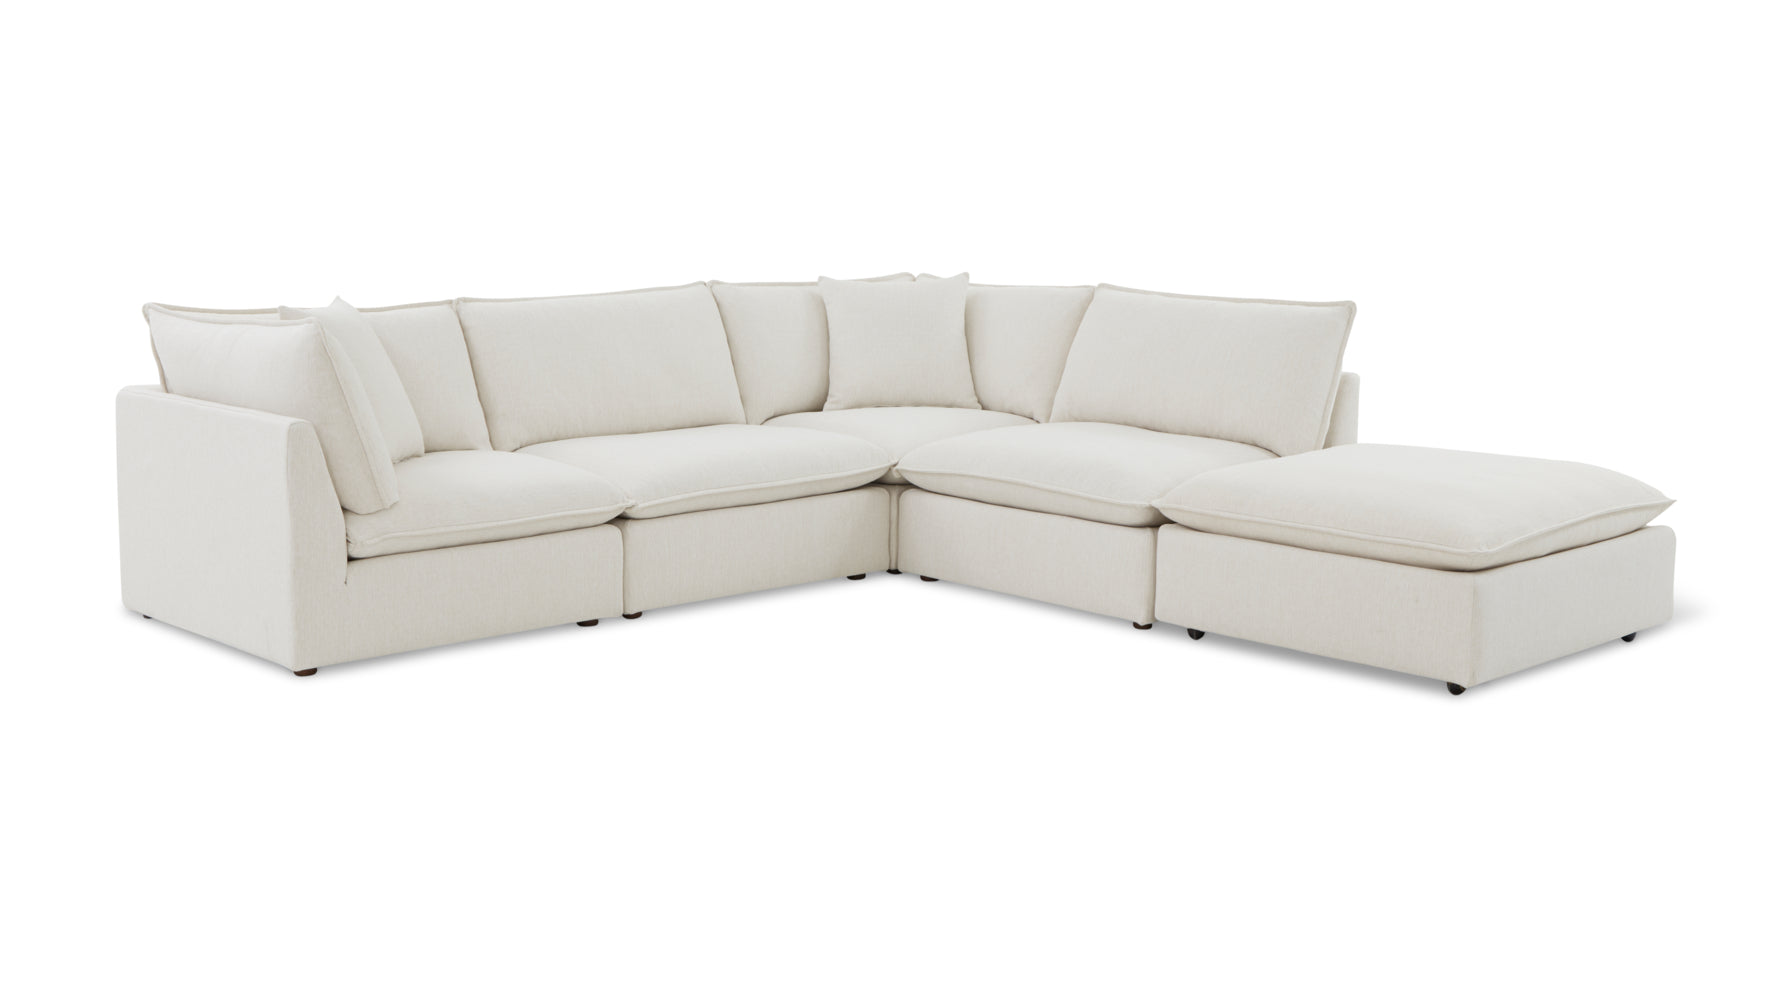 Chill Time 5-Piece Modular Sectional, Birch - Image 2